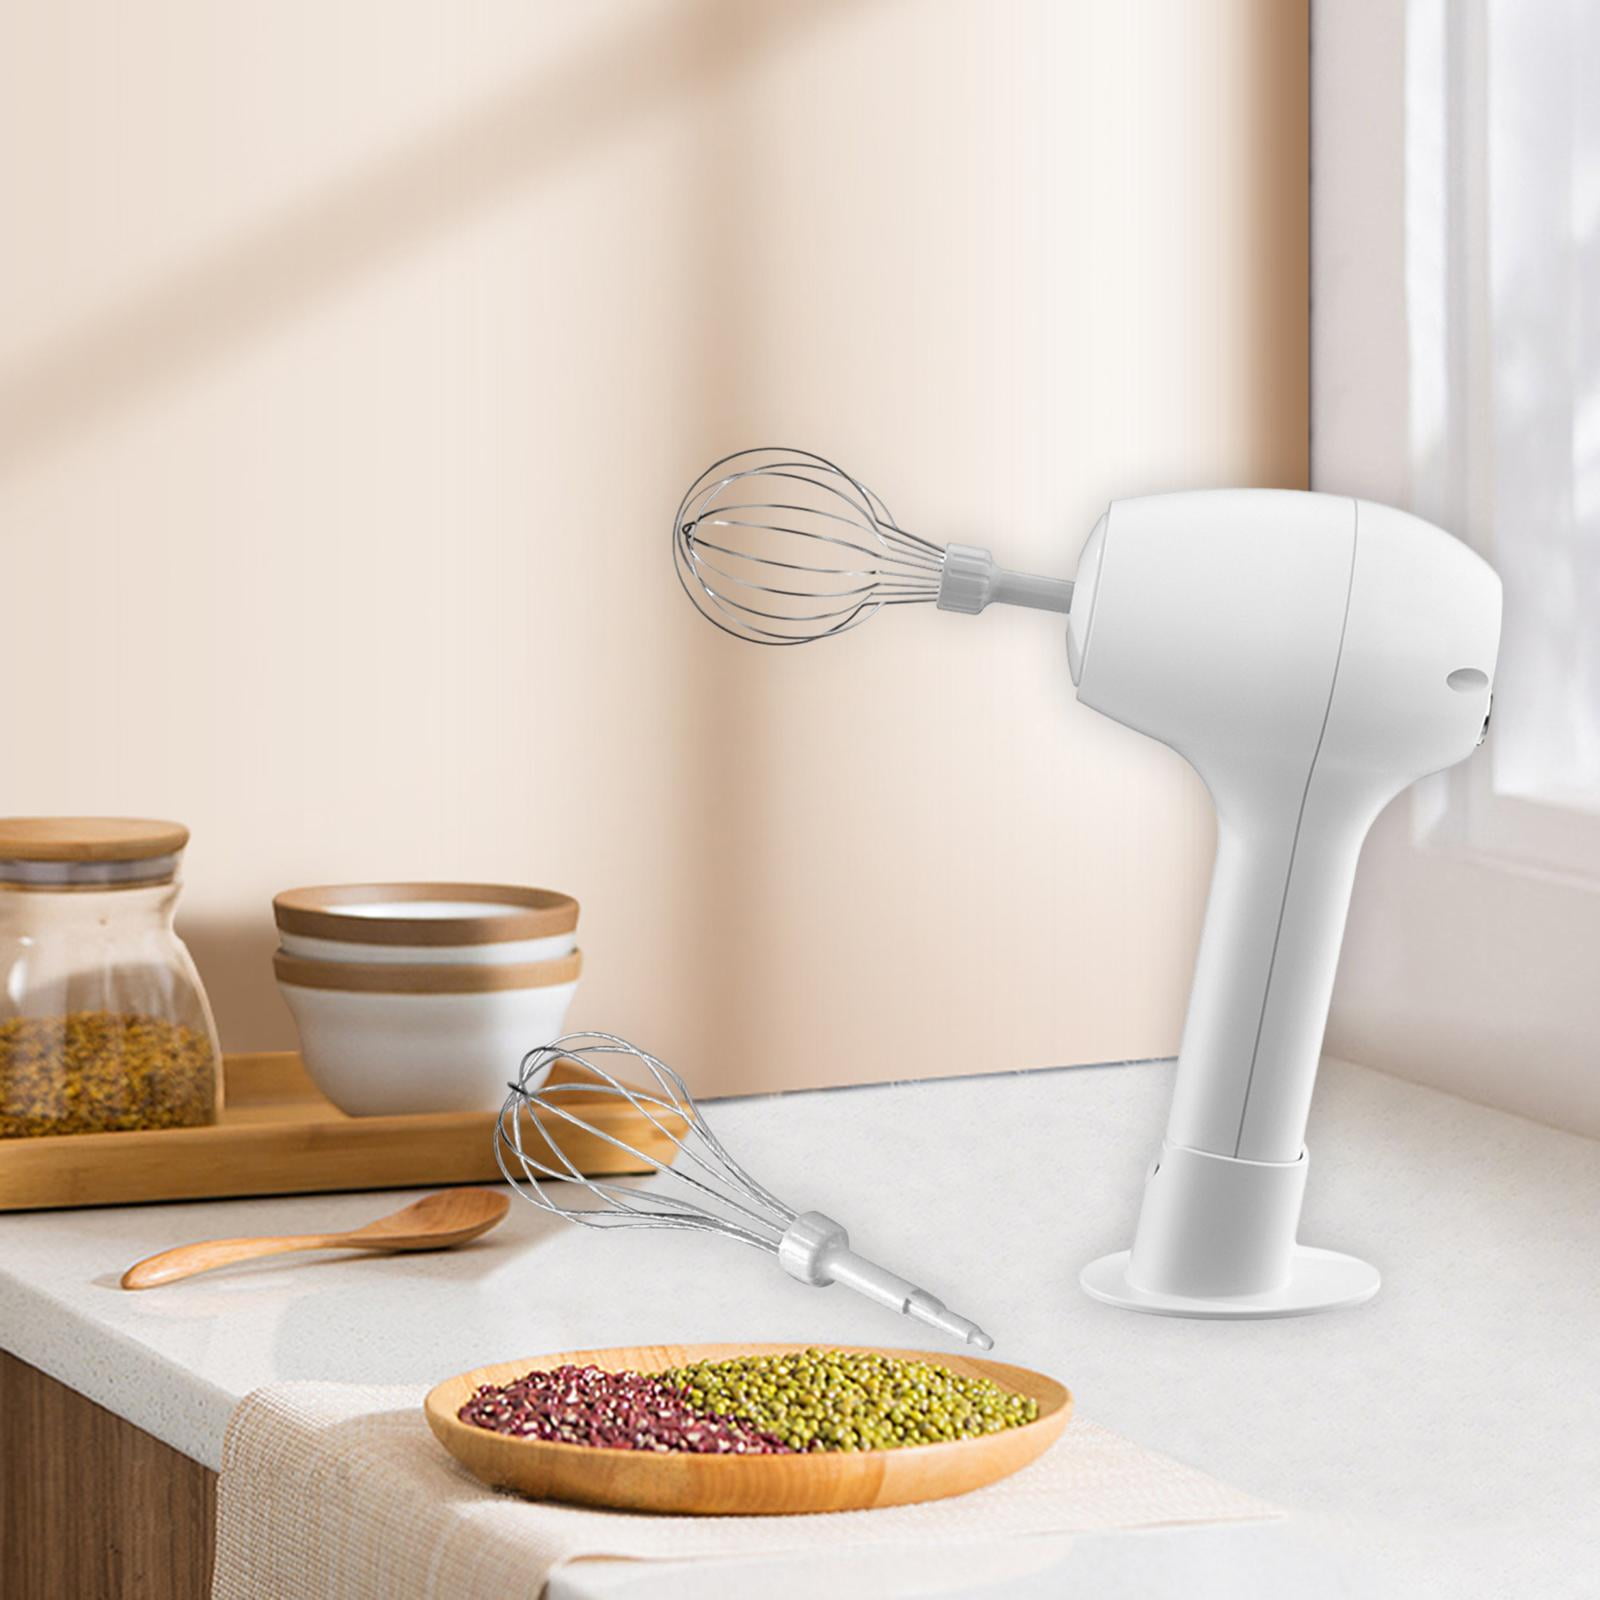 Cocoa Metro—NEW Electric Mini Whisk coming soon